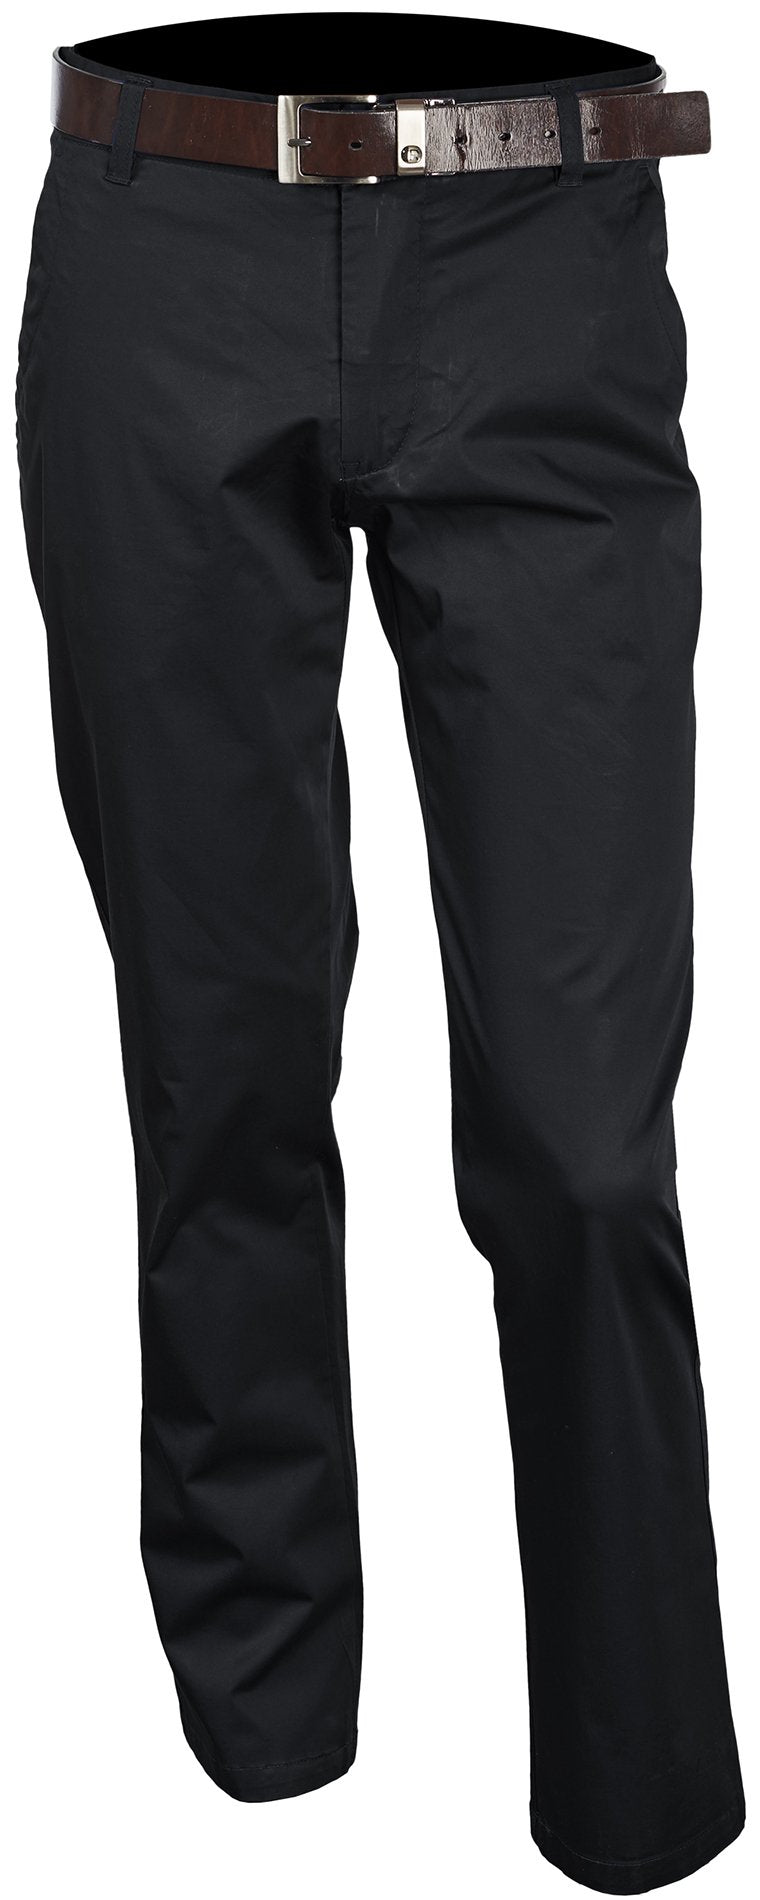 Inserch Brushed Cotton Chinos P021-01 Black